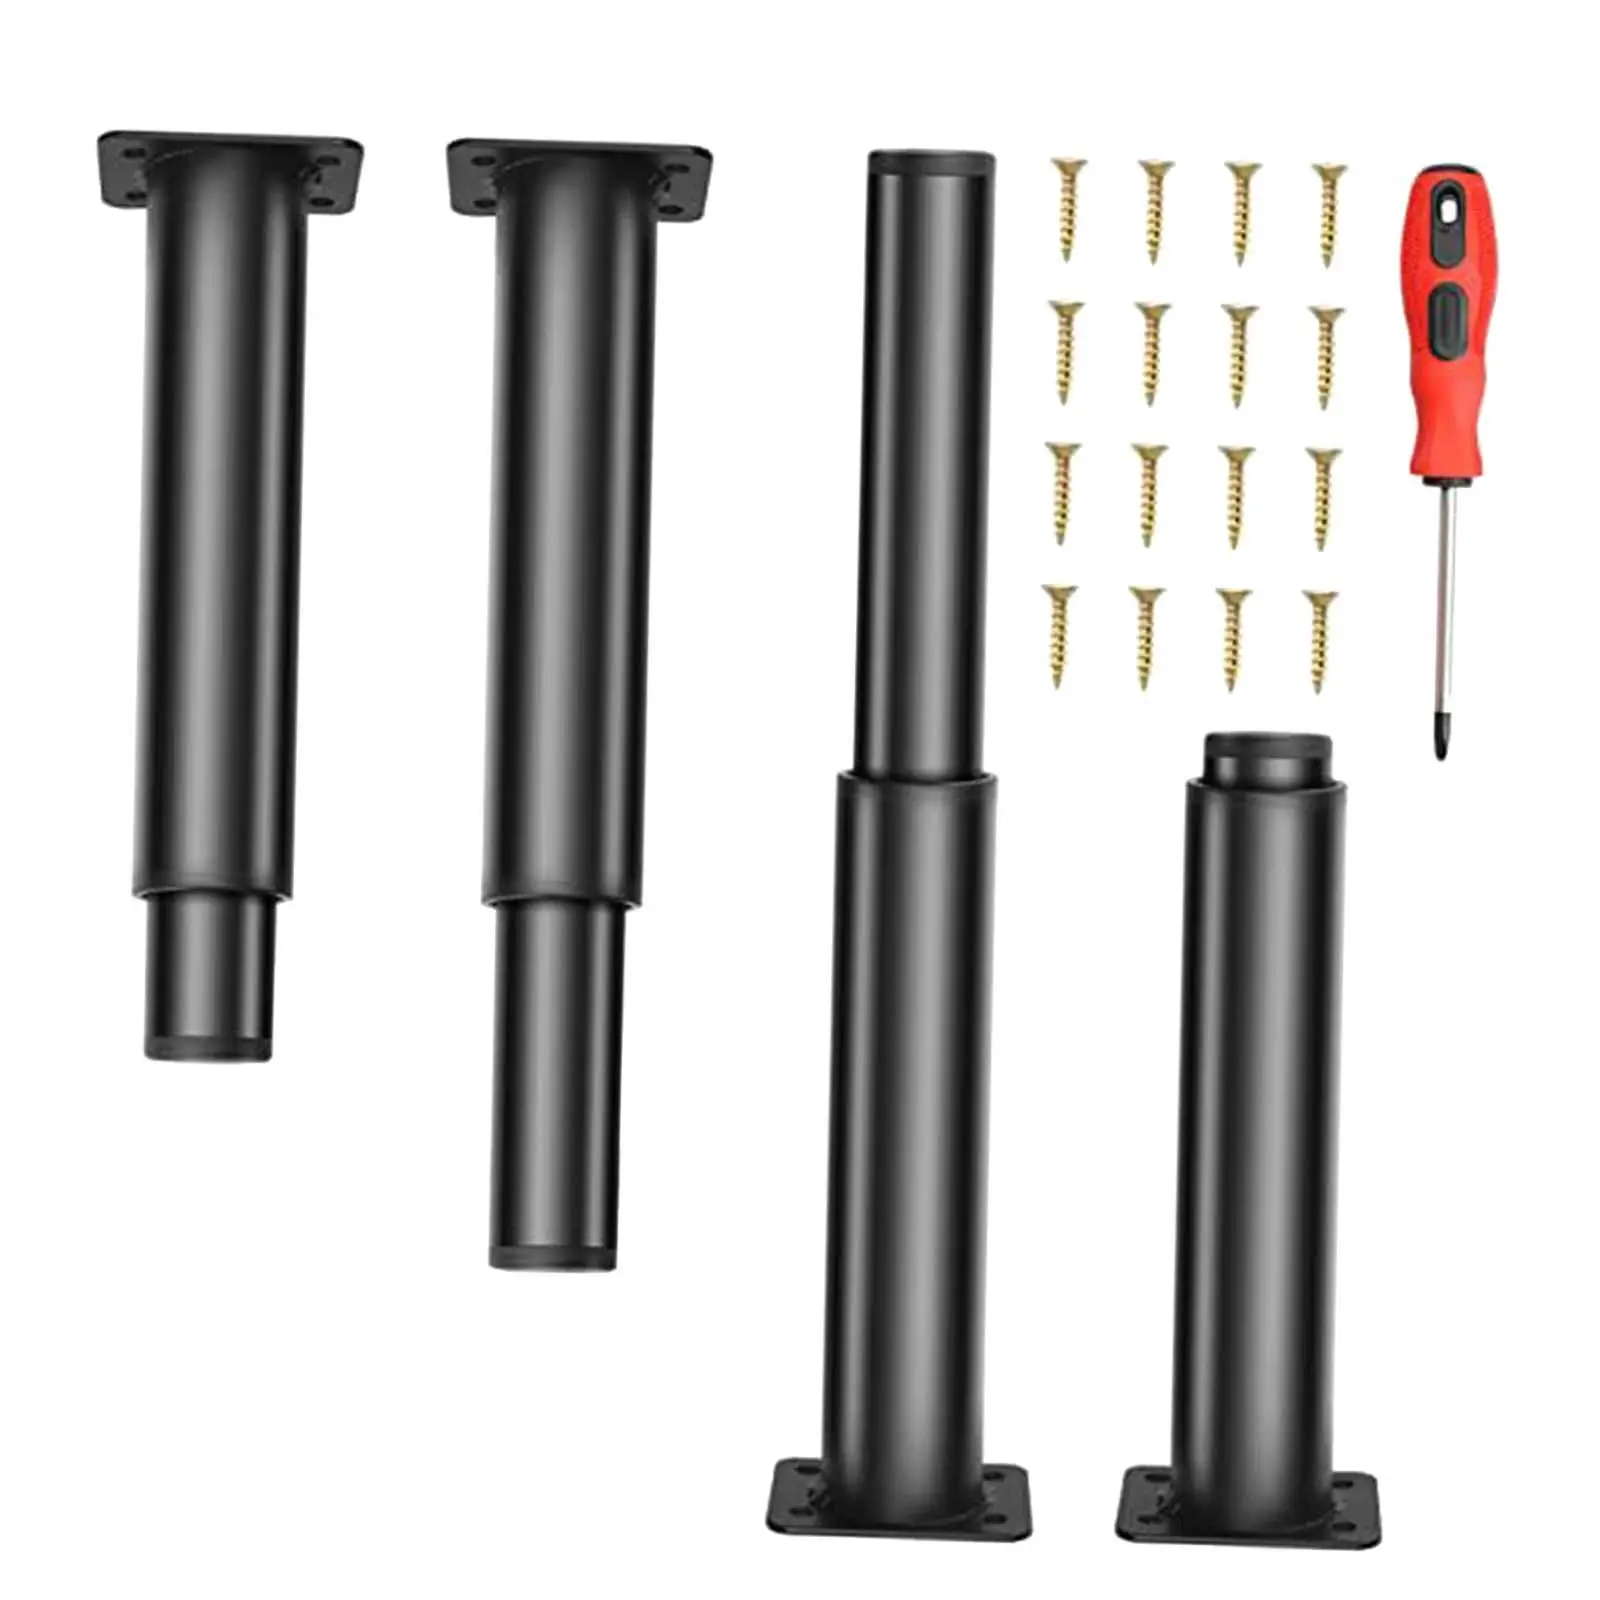 4 Pieces Metal Adjustable Leg for Table Black Adjustable Cabinet Foot Legs for Dressing Table Desks Coffee Table Furniture Sofa